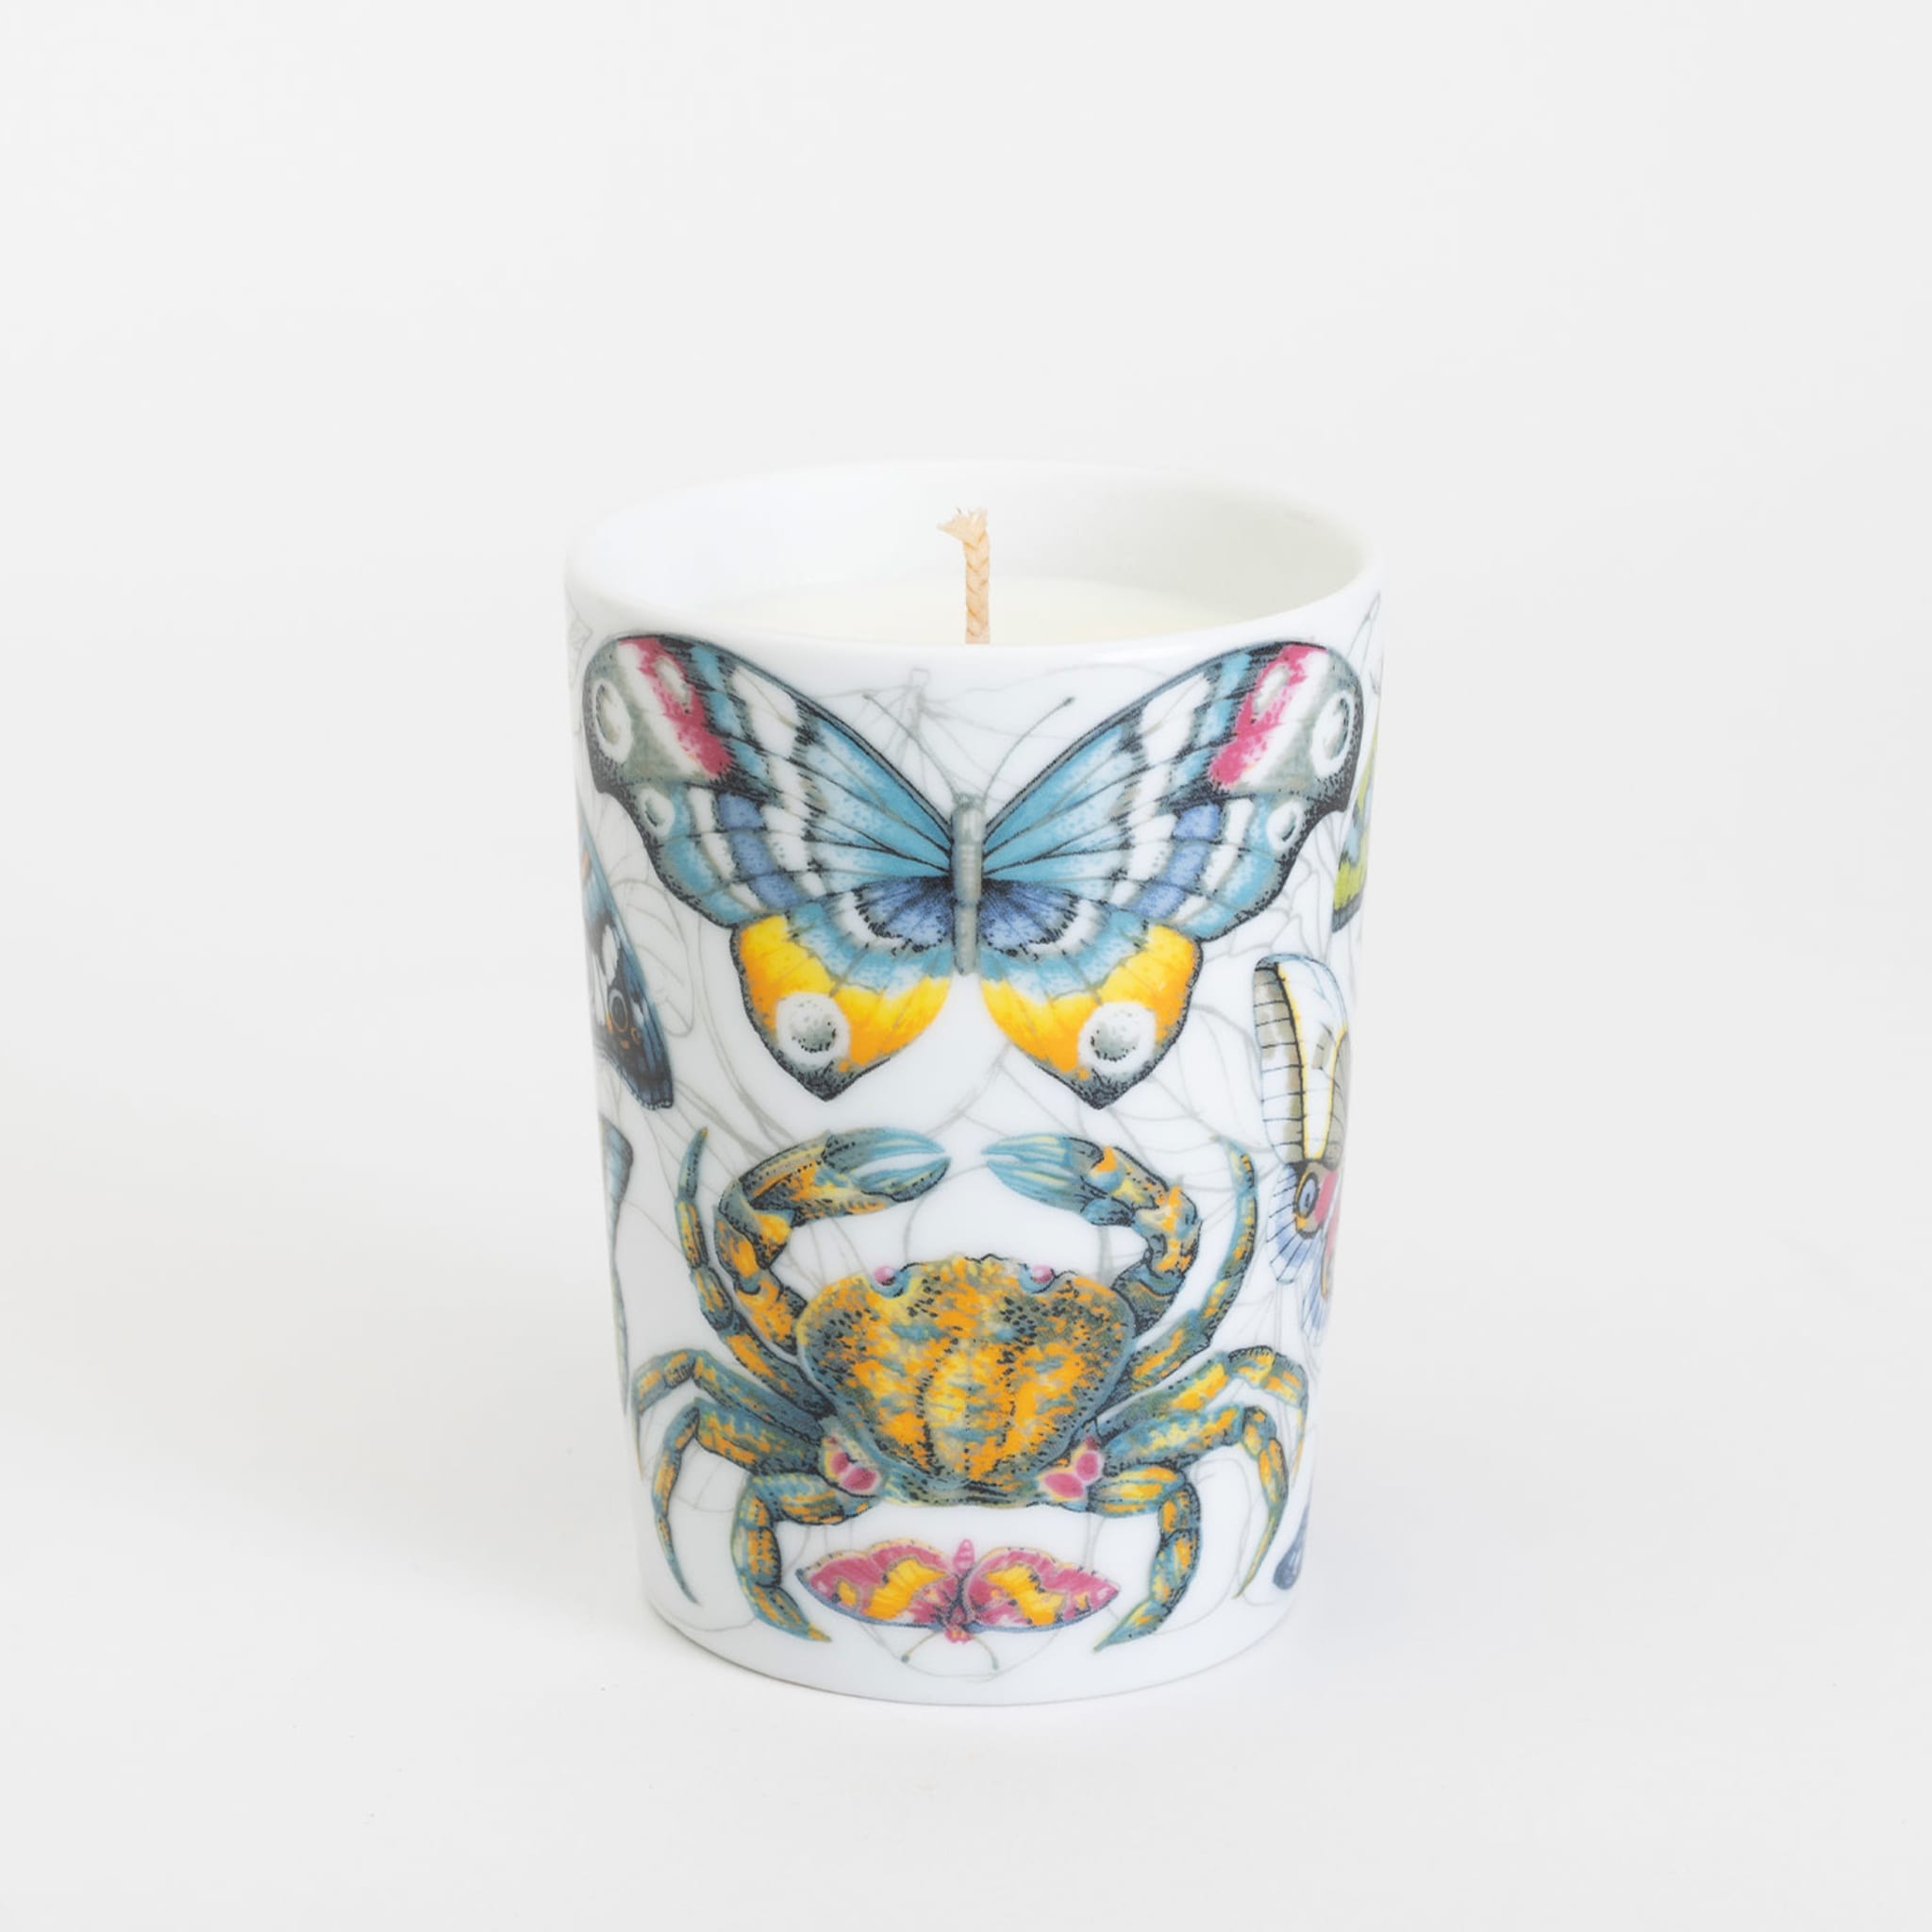 Carezze Luxe Candle - Alternative view 1